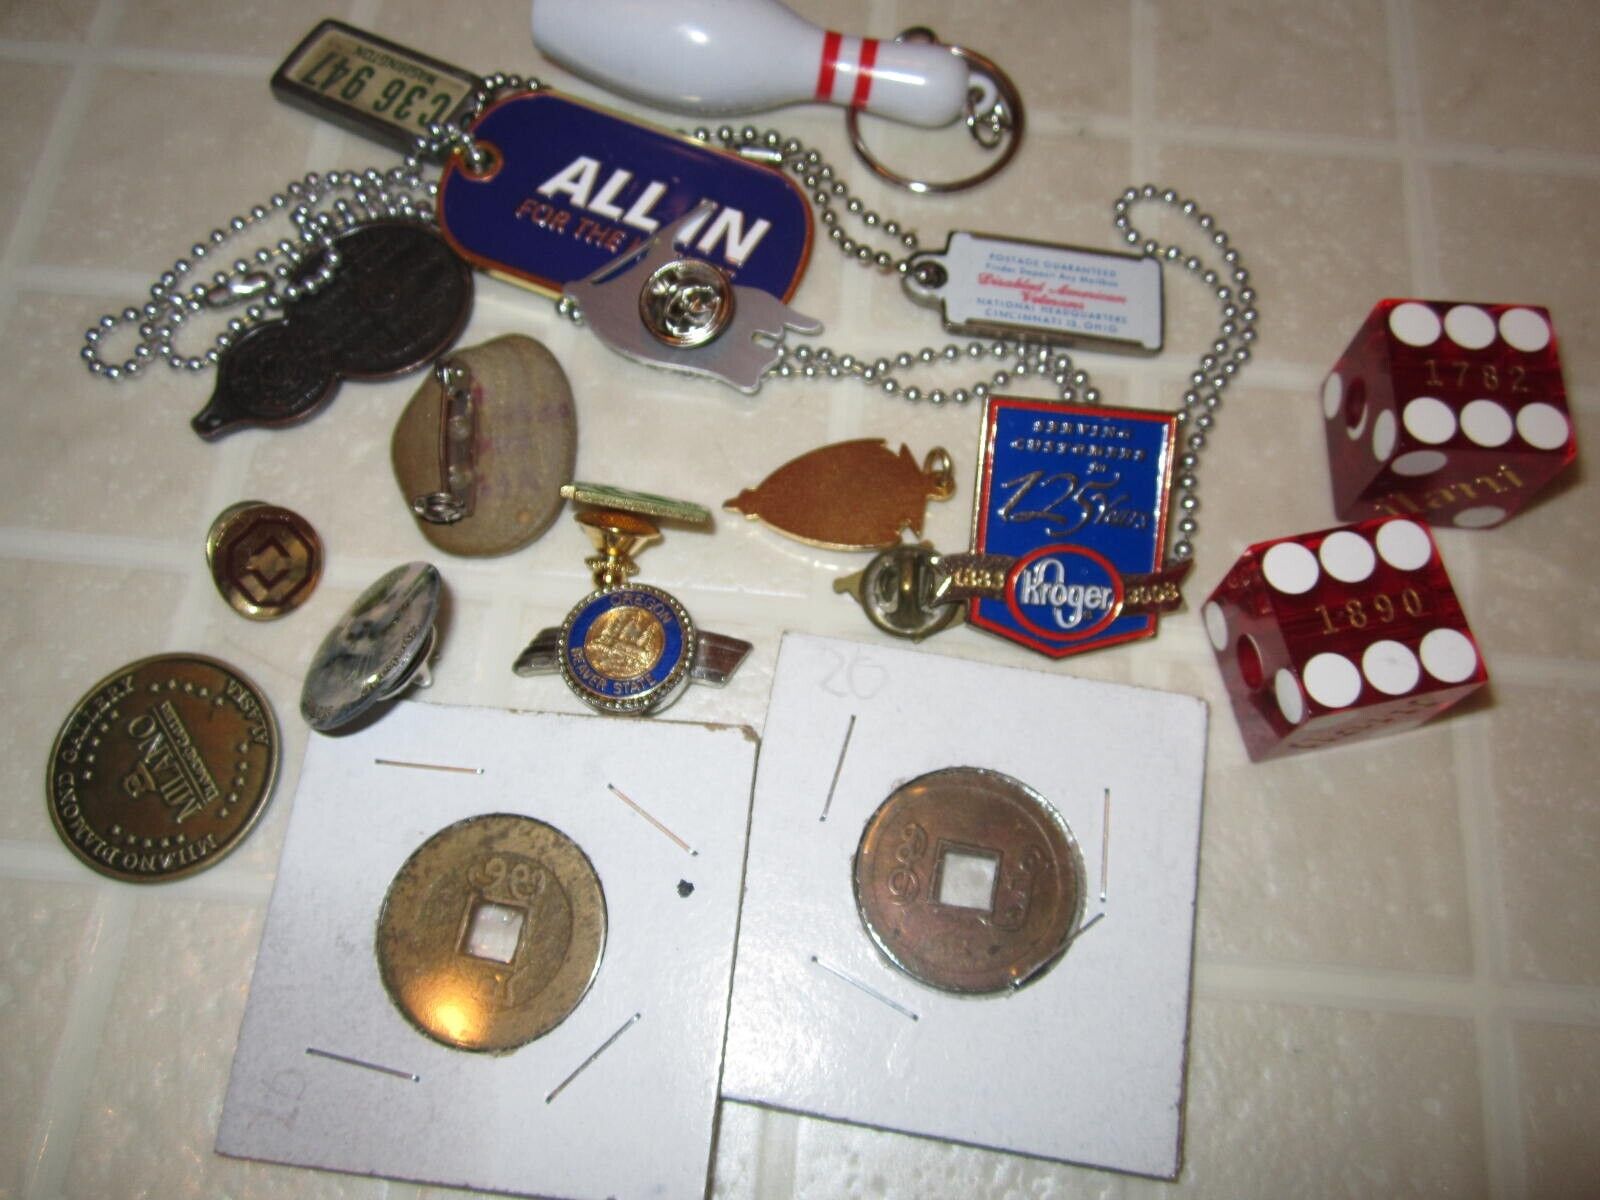 Collectors Dream Junk Drawer Estate lot, Extremely Rare Medals, Pins, Dice Coins